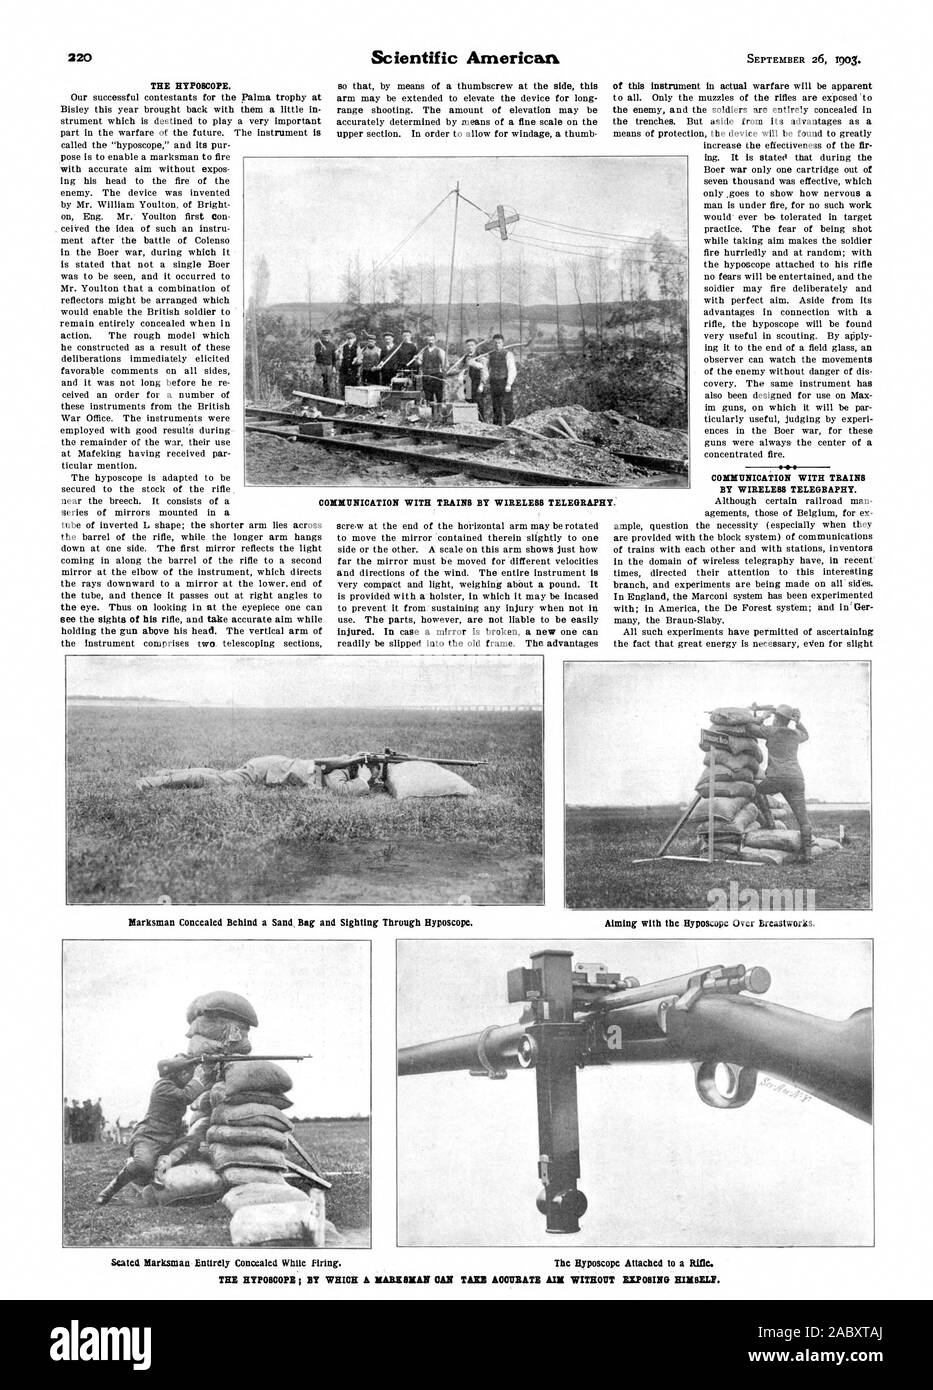 COMMUNICATION WITH TRAINS BY WIRELESS TELEGRAPHY.' is provided with a holster in which it may be incased to prevent it from sustaining any injury when not in readily be slipped into the old frame. The advantages COMMUNICATION WITH TRAINS BY WIRELESS TELEGRAPHY. Marksman Concealed Behind a Sand Bag and Sighting Through Hyposcope. Aiming with the Hyposcope Over Breastworks. TILE HYPOBCOPE ; BY WHICH A MARKSMAN CAN TAKE ACCURATE AIM WITHOUT EXPOSING HIMSELF., scientific american, 1903-09-26 Stock Photo